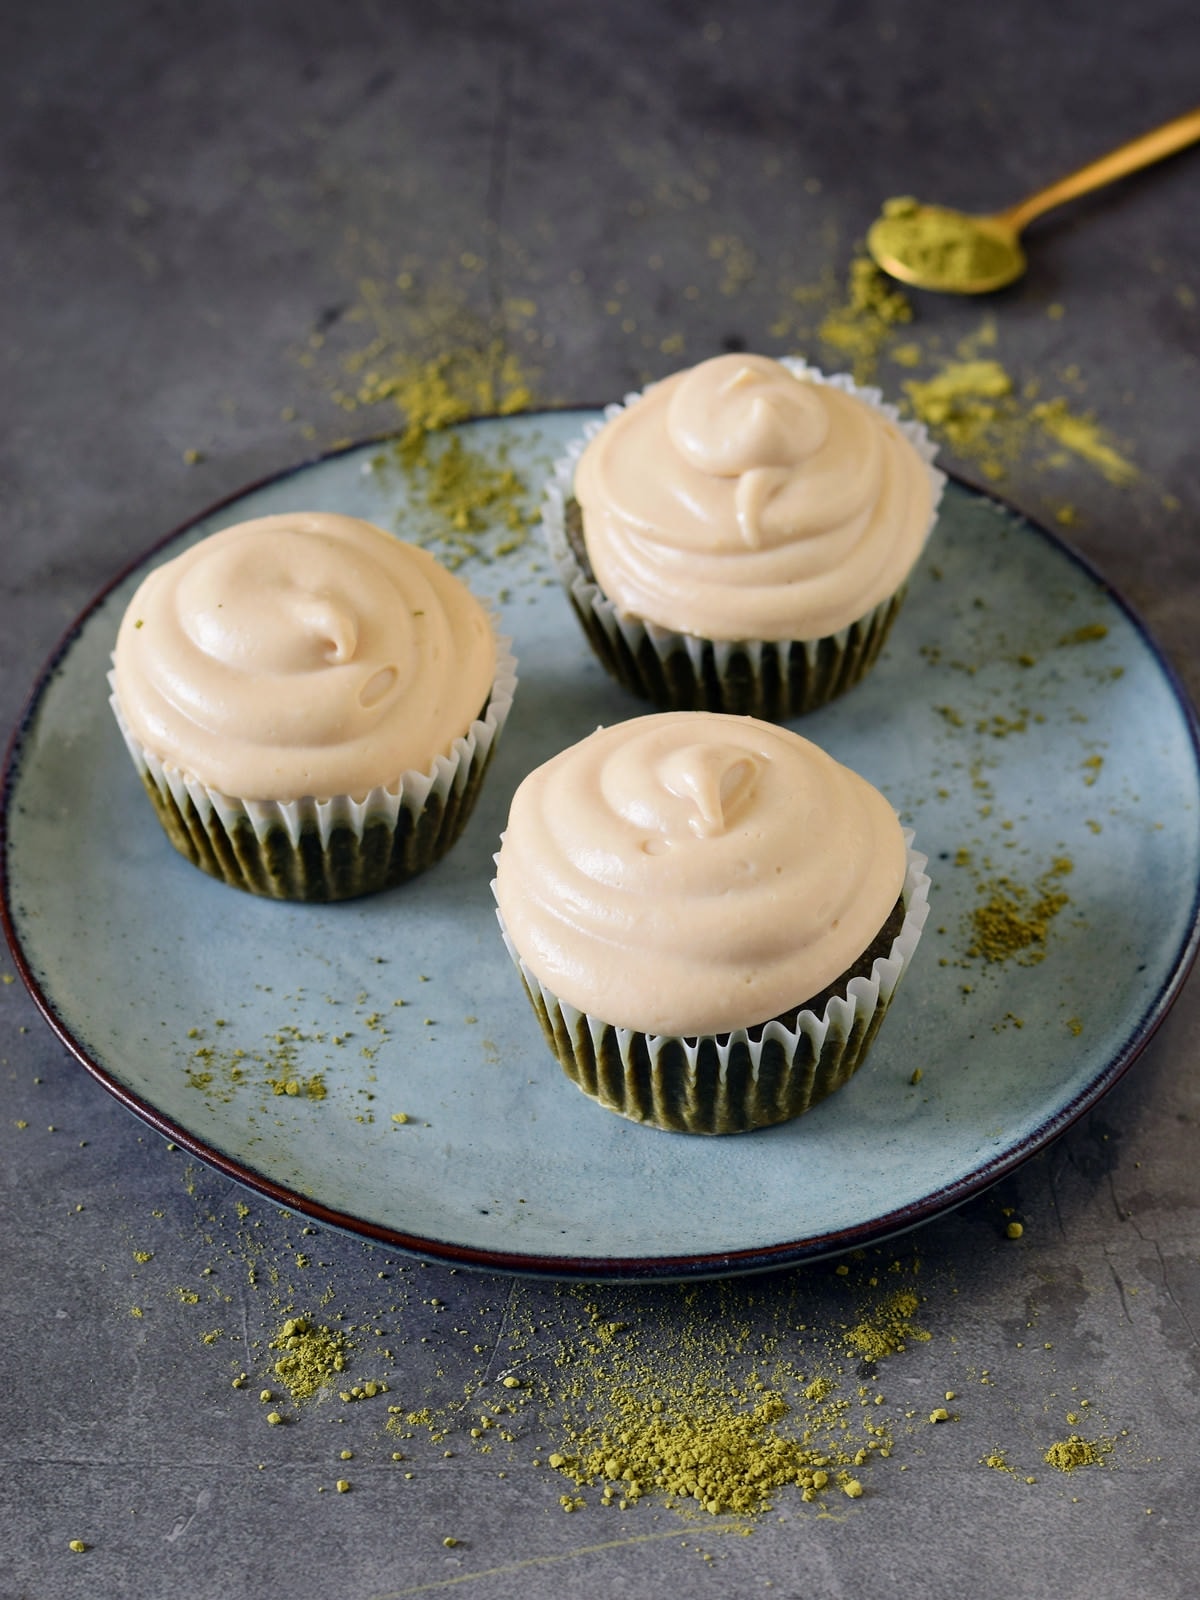 3 matcha cupcakes with white cashew frosting on blue plate